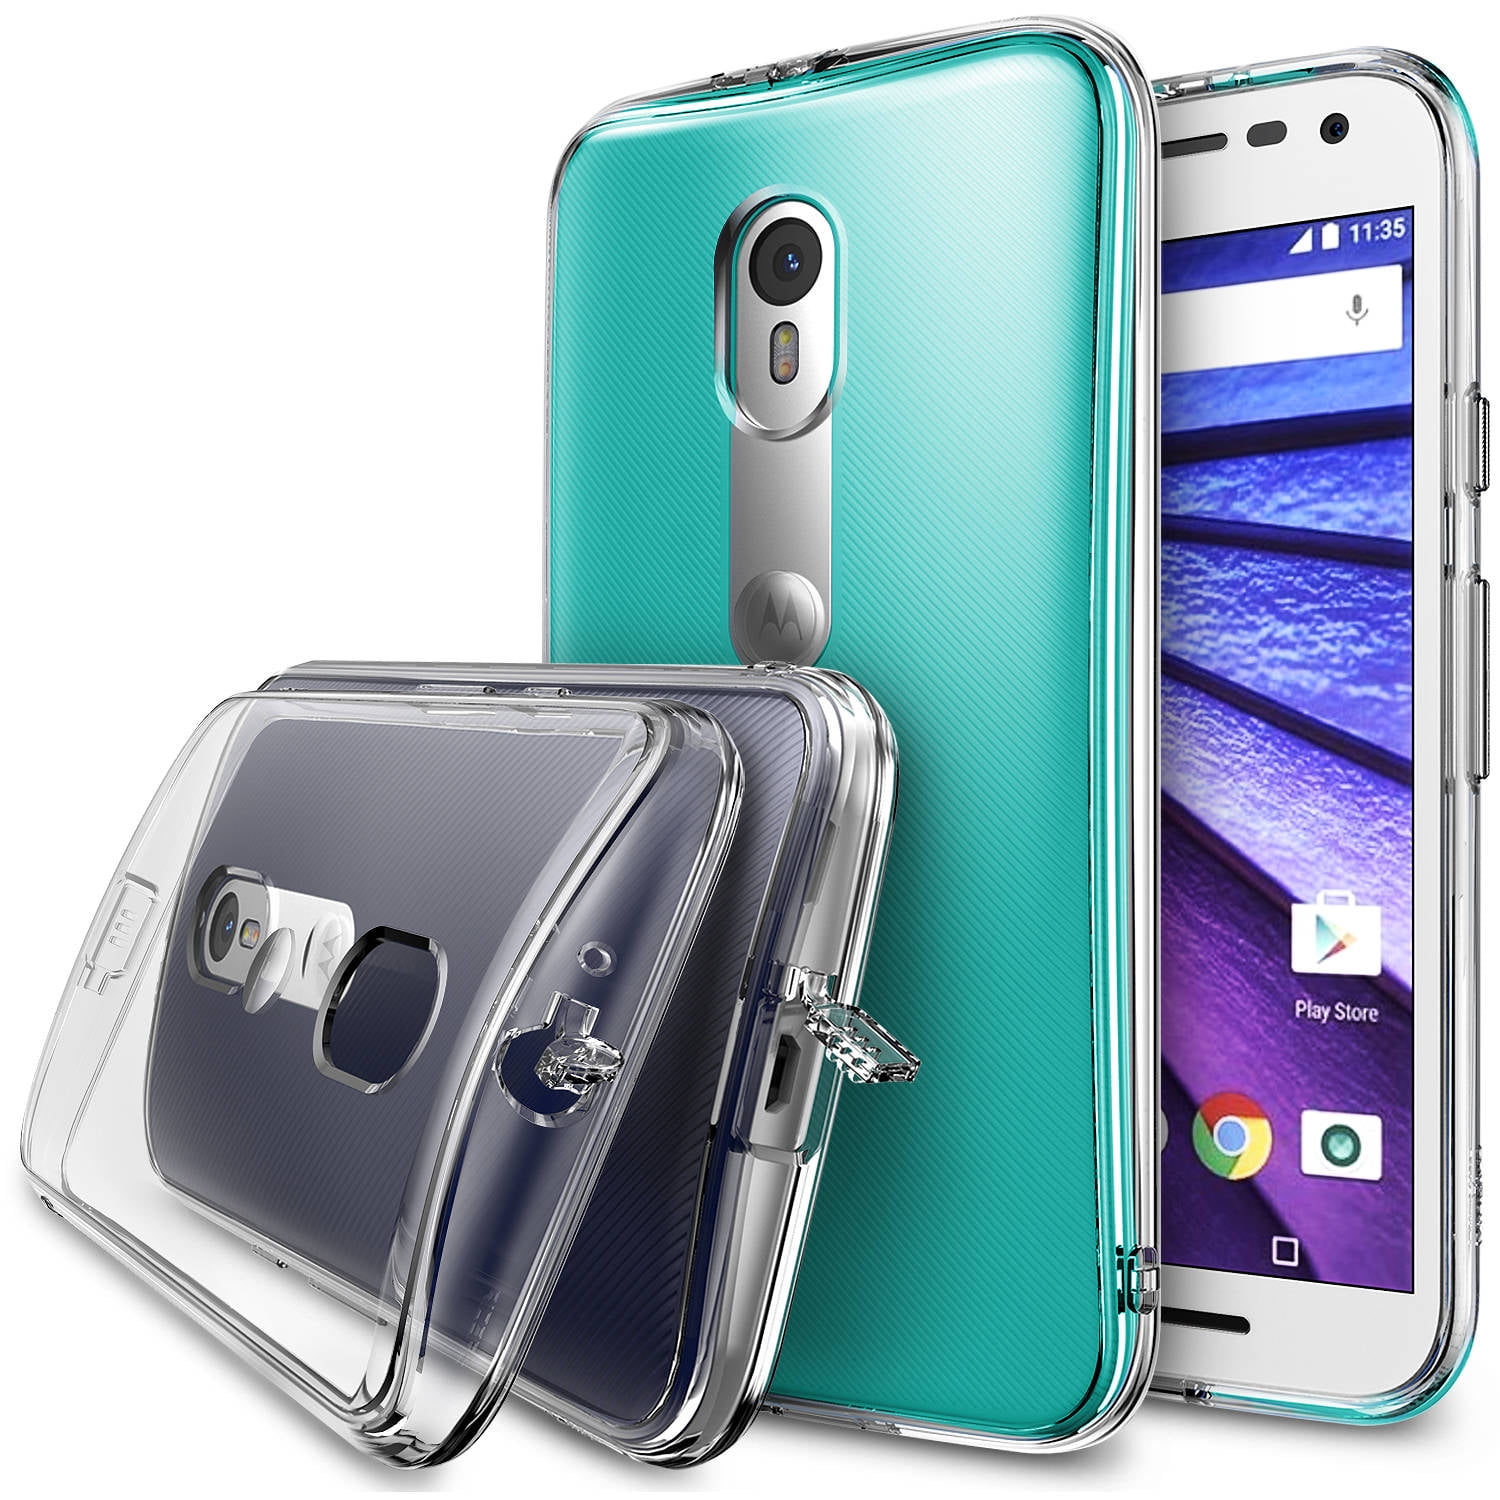 Dierentuin s nachts Potentieel Puno Moto G 2015 Case, Ringke [Fusion] Crystal Clear PC Back TPU Bumper w/  Screen Protector - Walmart.com